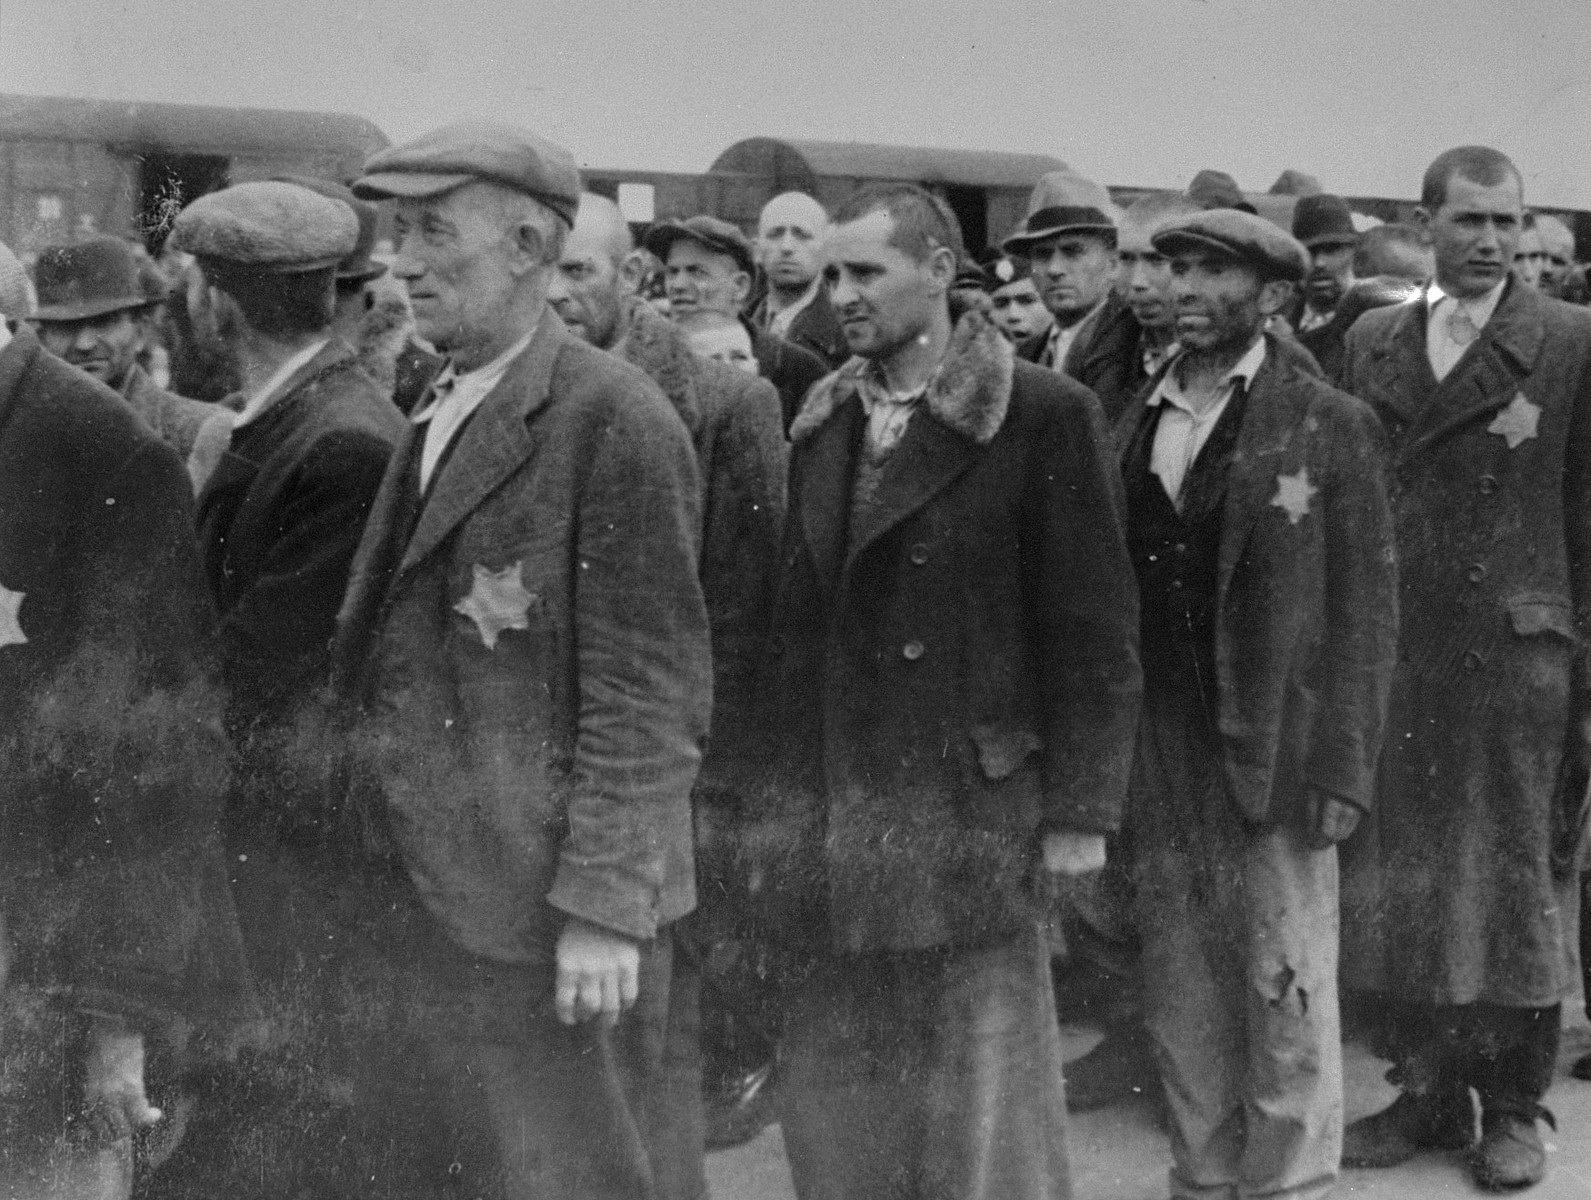 Jewish men from Subcarpathian Rus await selection on the ramp at Auschwitz-Birkenau.

Among those pictured is Chiam Elia Kreitenberg (back center in a cap, killed during High Holiday selections), his son Josef Jankelovits (Kreitenberg) immediately in front of him partially obscured, another son Mende (Moric) Jankelovits (Menachem Mendel, later Mike Kreitenberg), and his older son Yitzhak Jankelovits (Kreitenberg) who volunteered to work as a blacksmith and was never seen again.